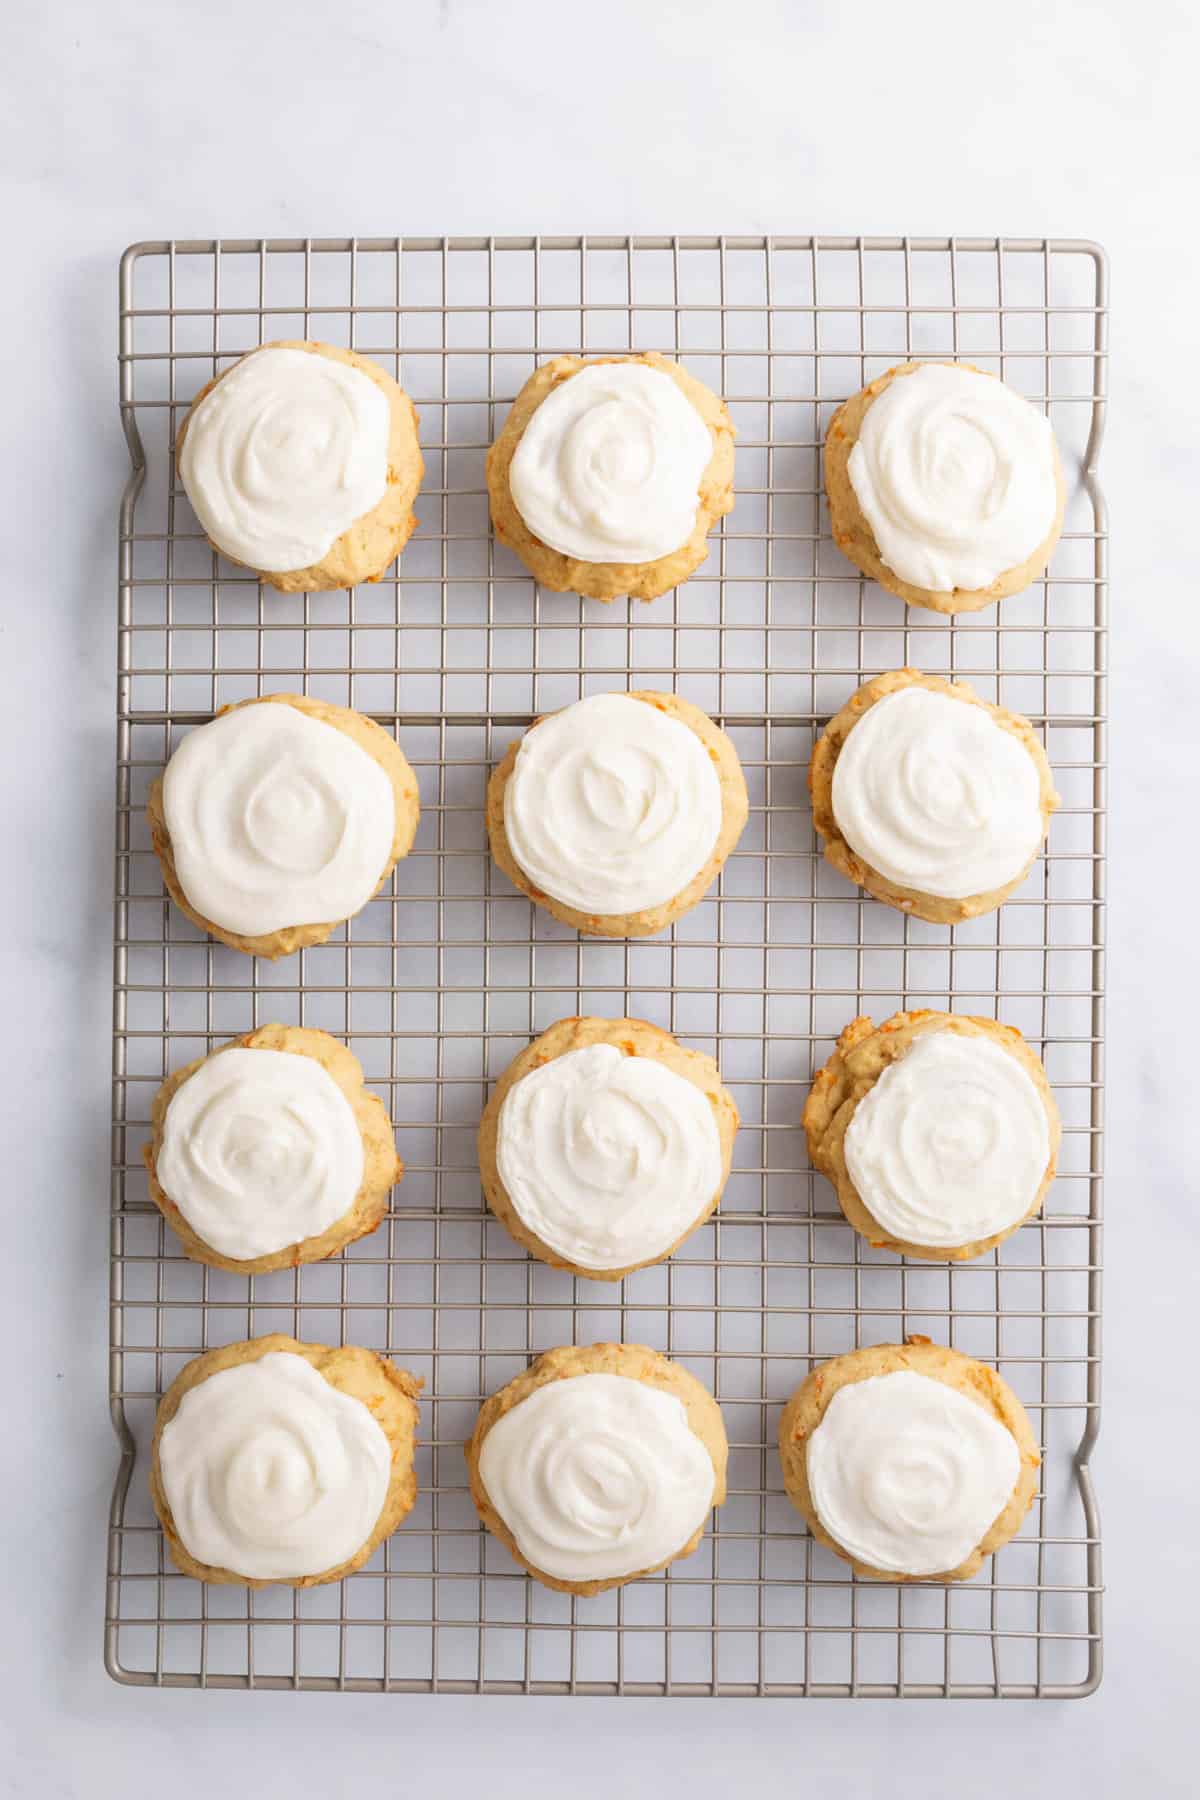 12 frosted carrot cake cookies sitting on a wire rack